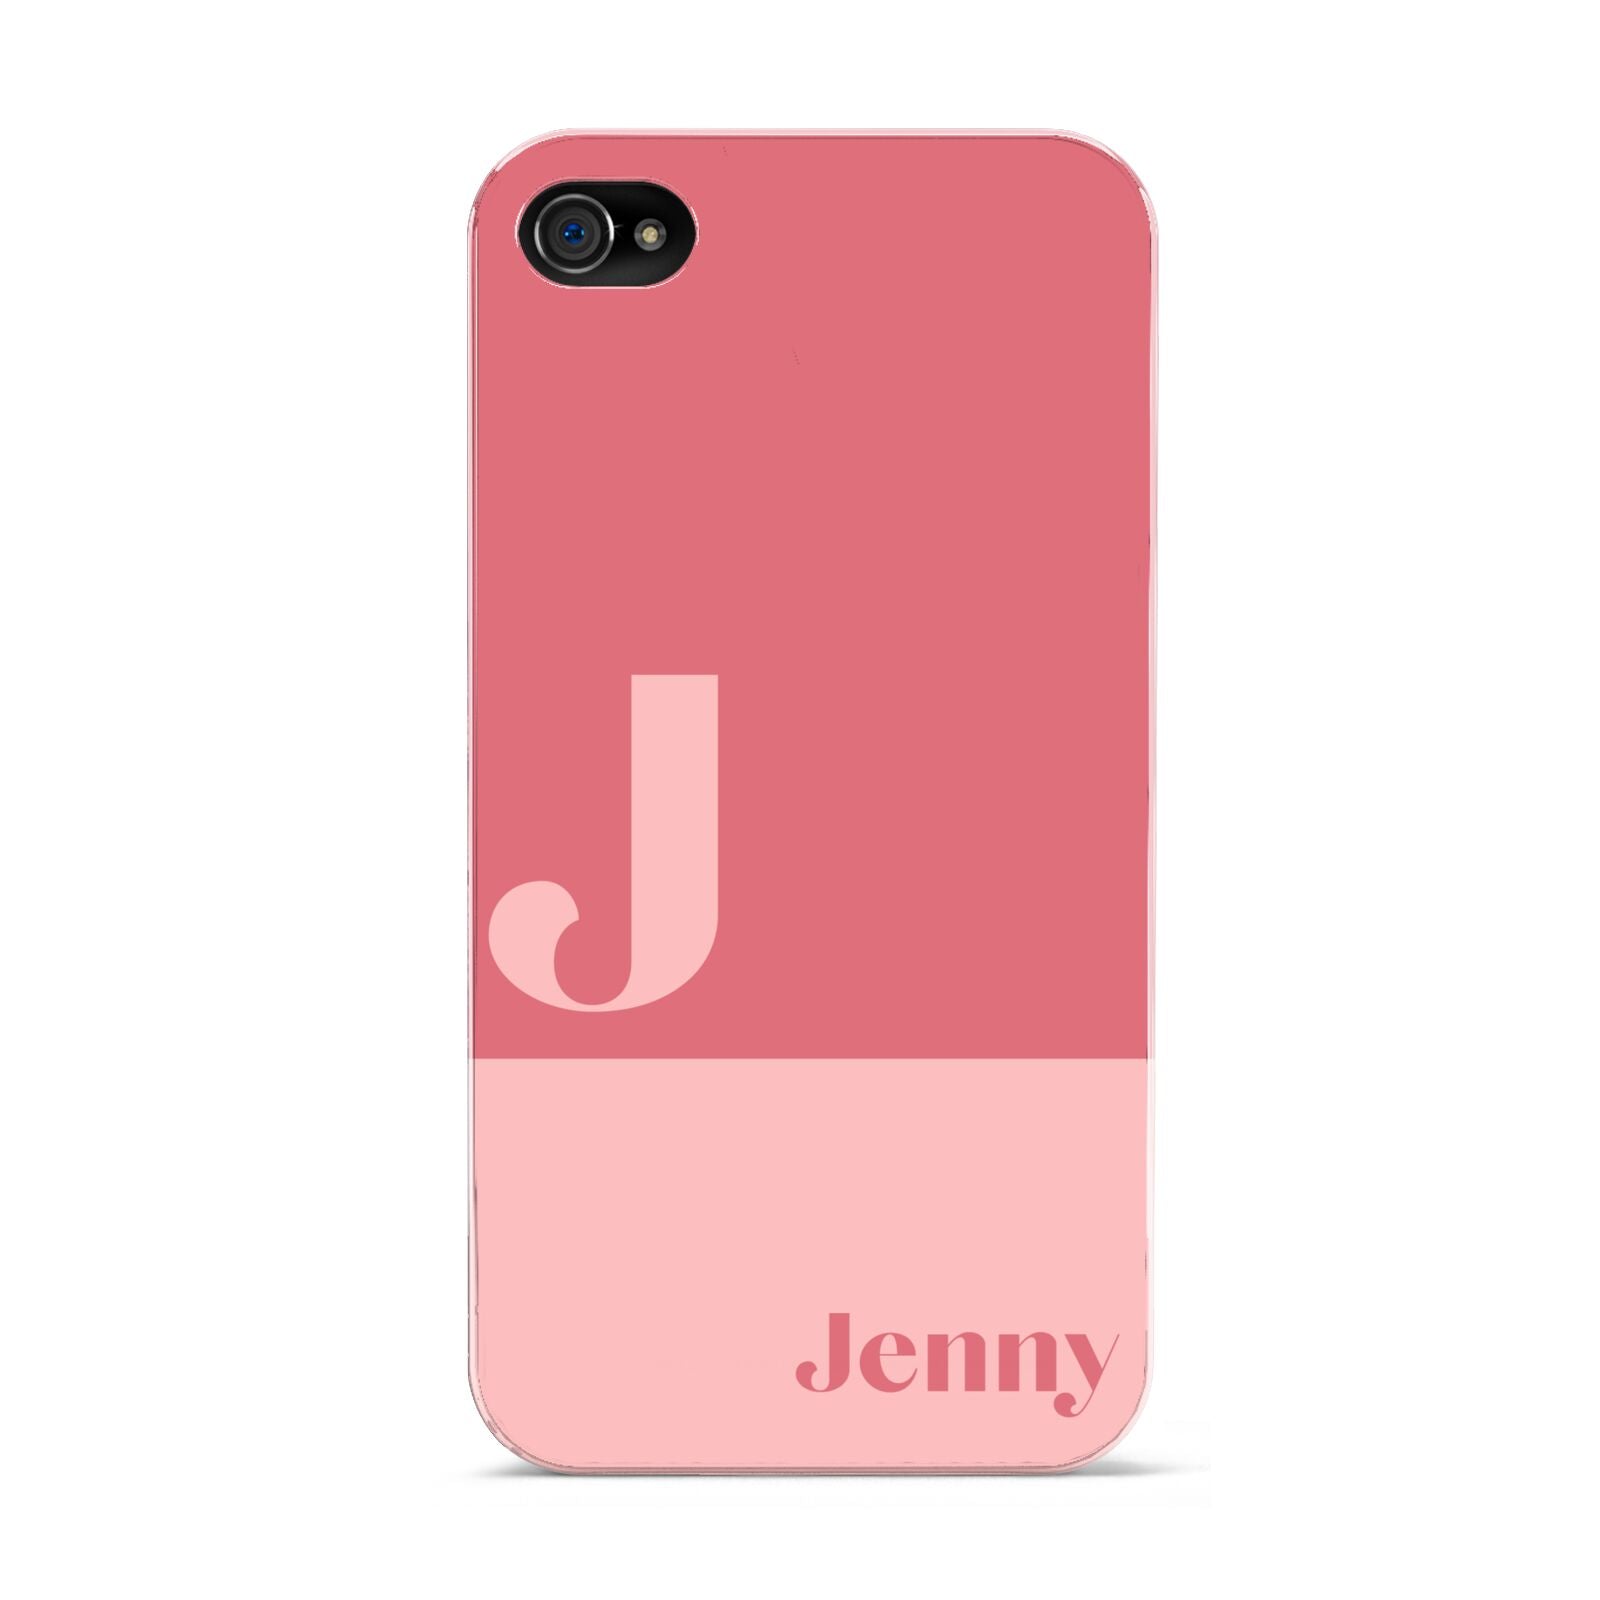 Contrast Personalised Pink Apple iPhone 4s Case